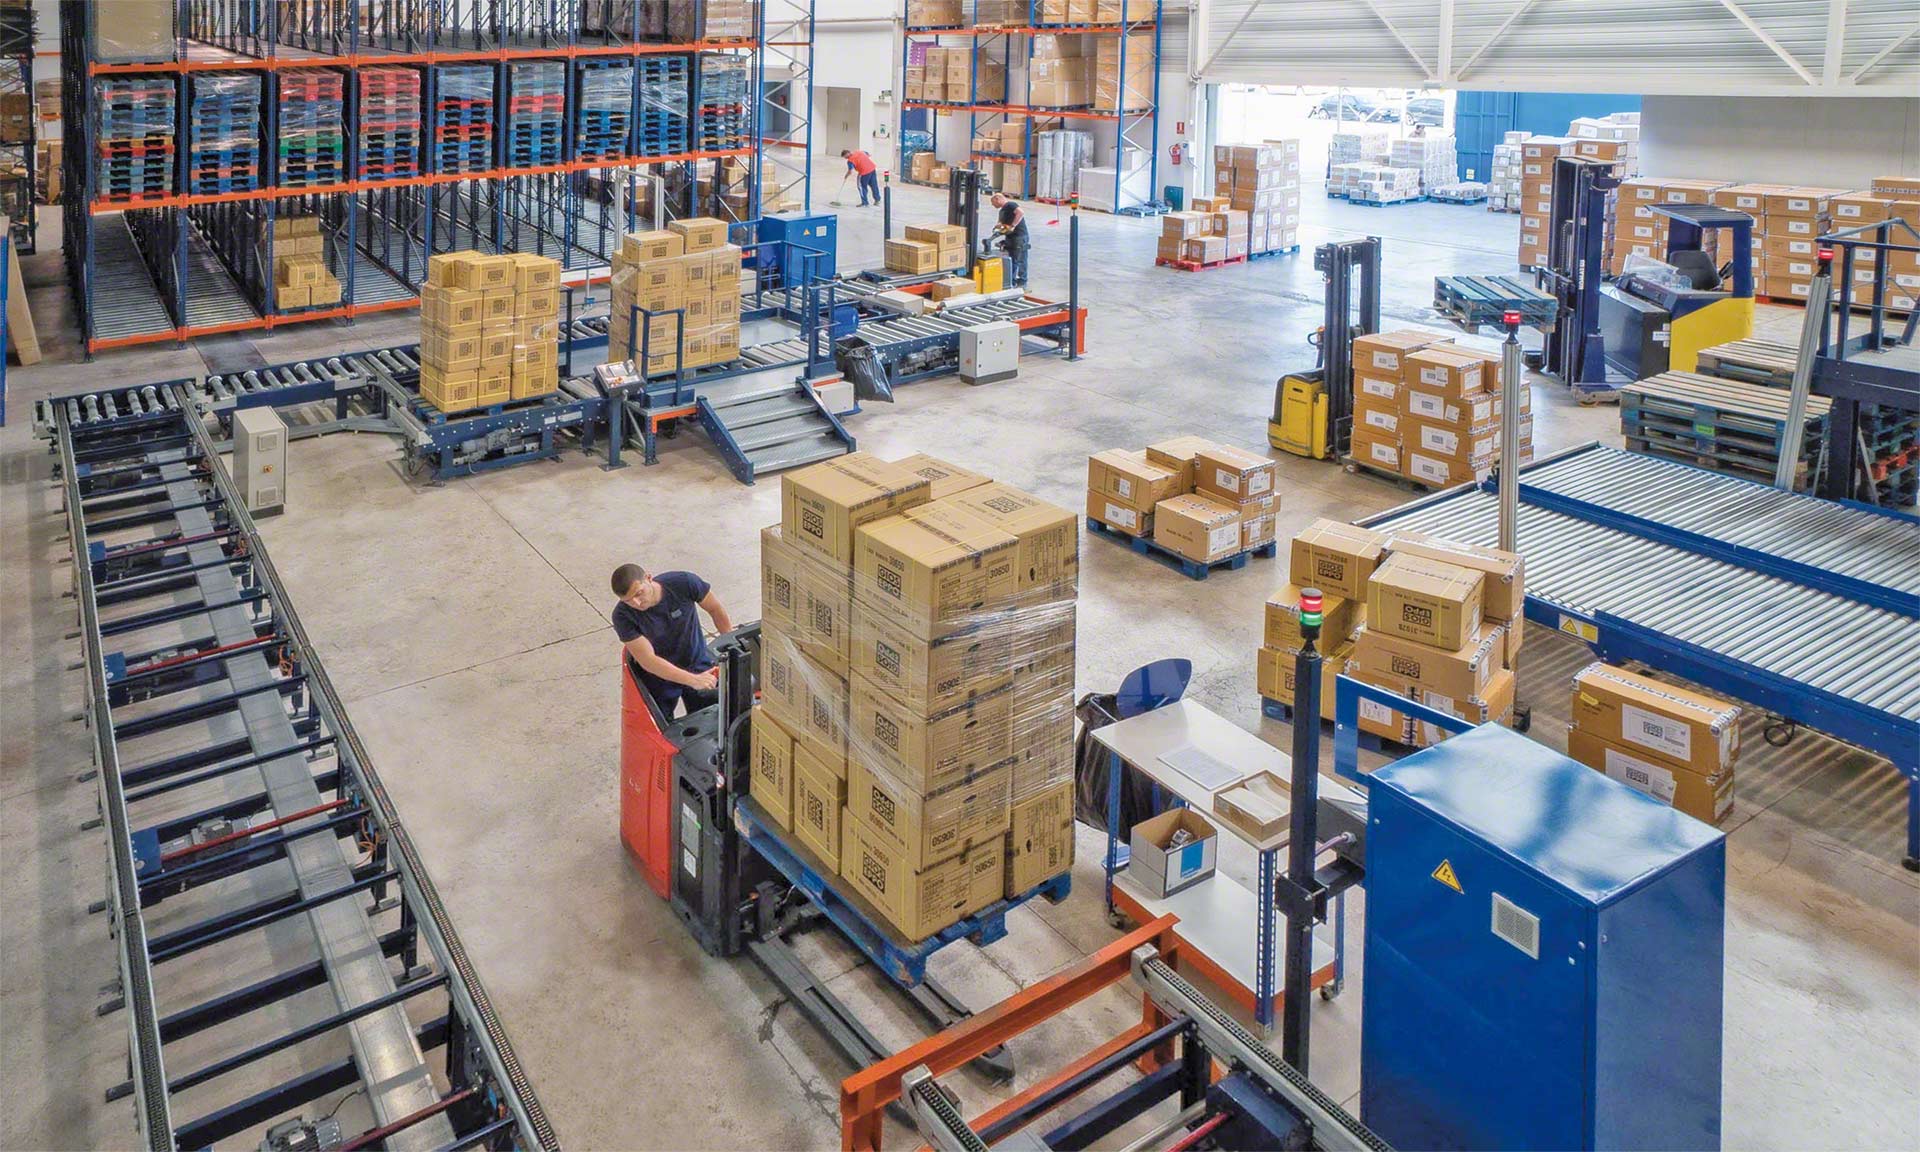 Warehouse machines are in charge of internal movements of goods